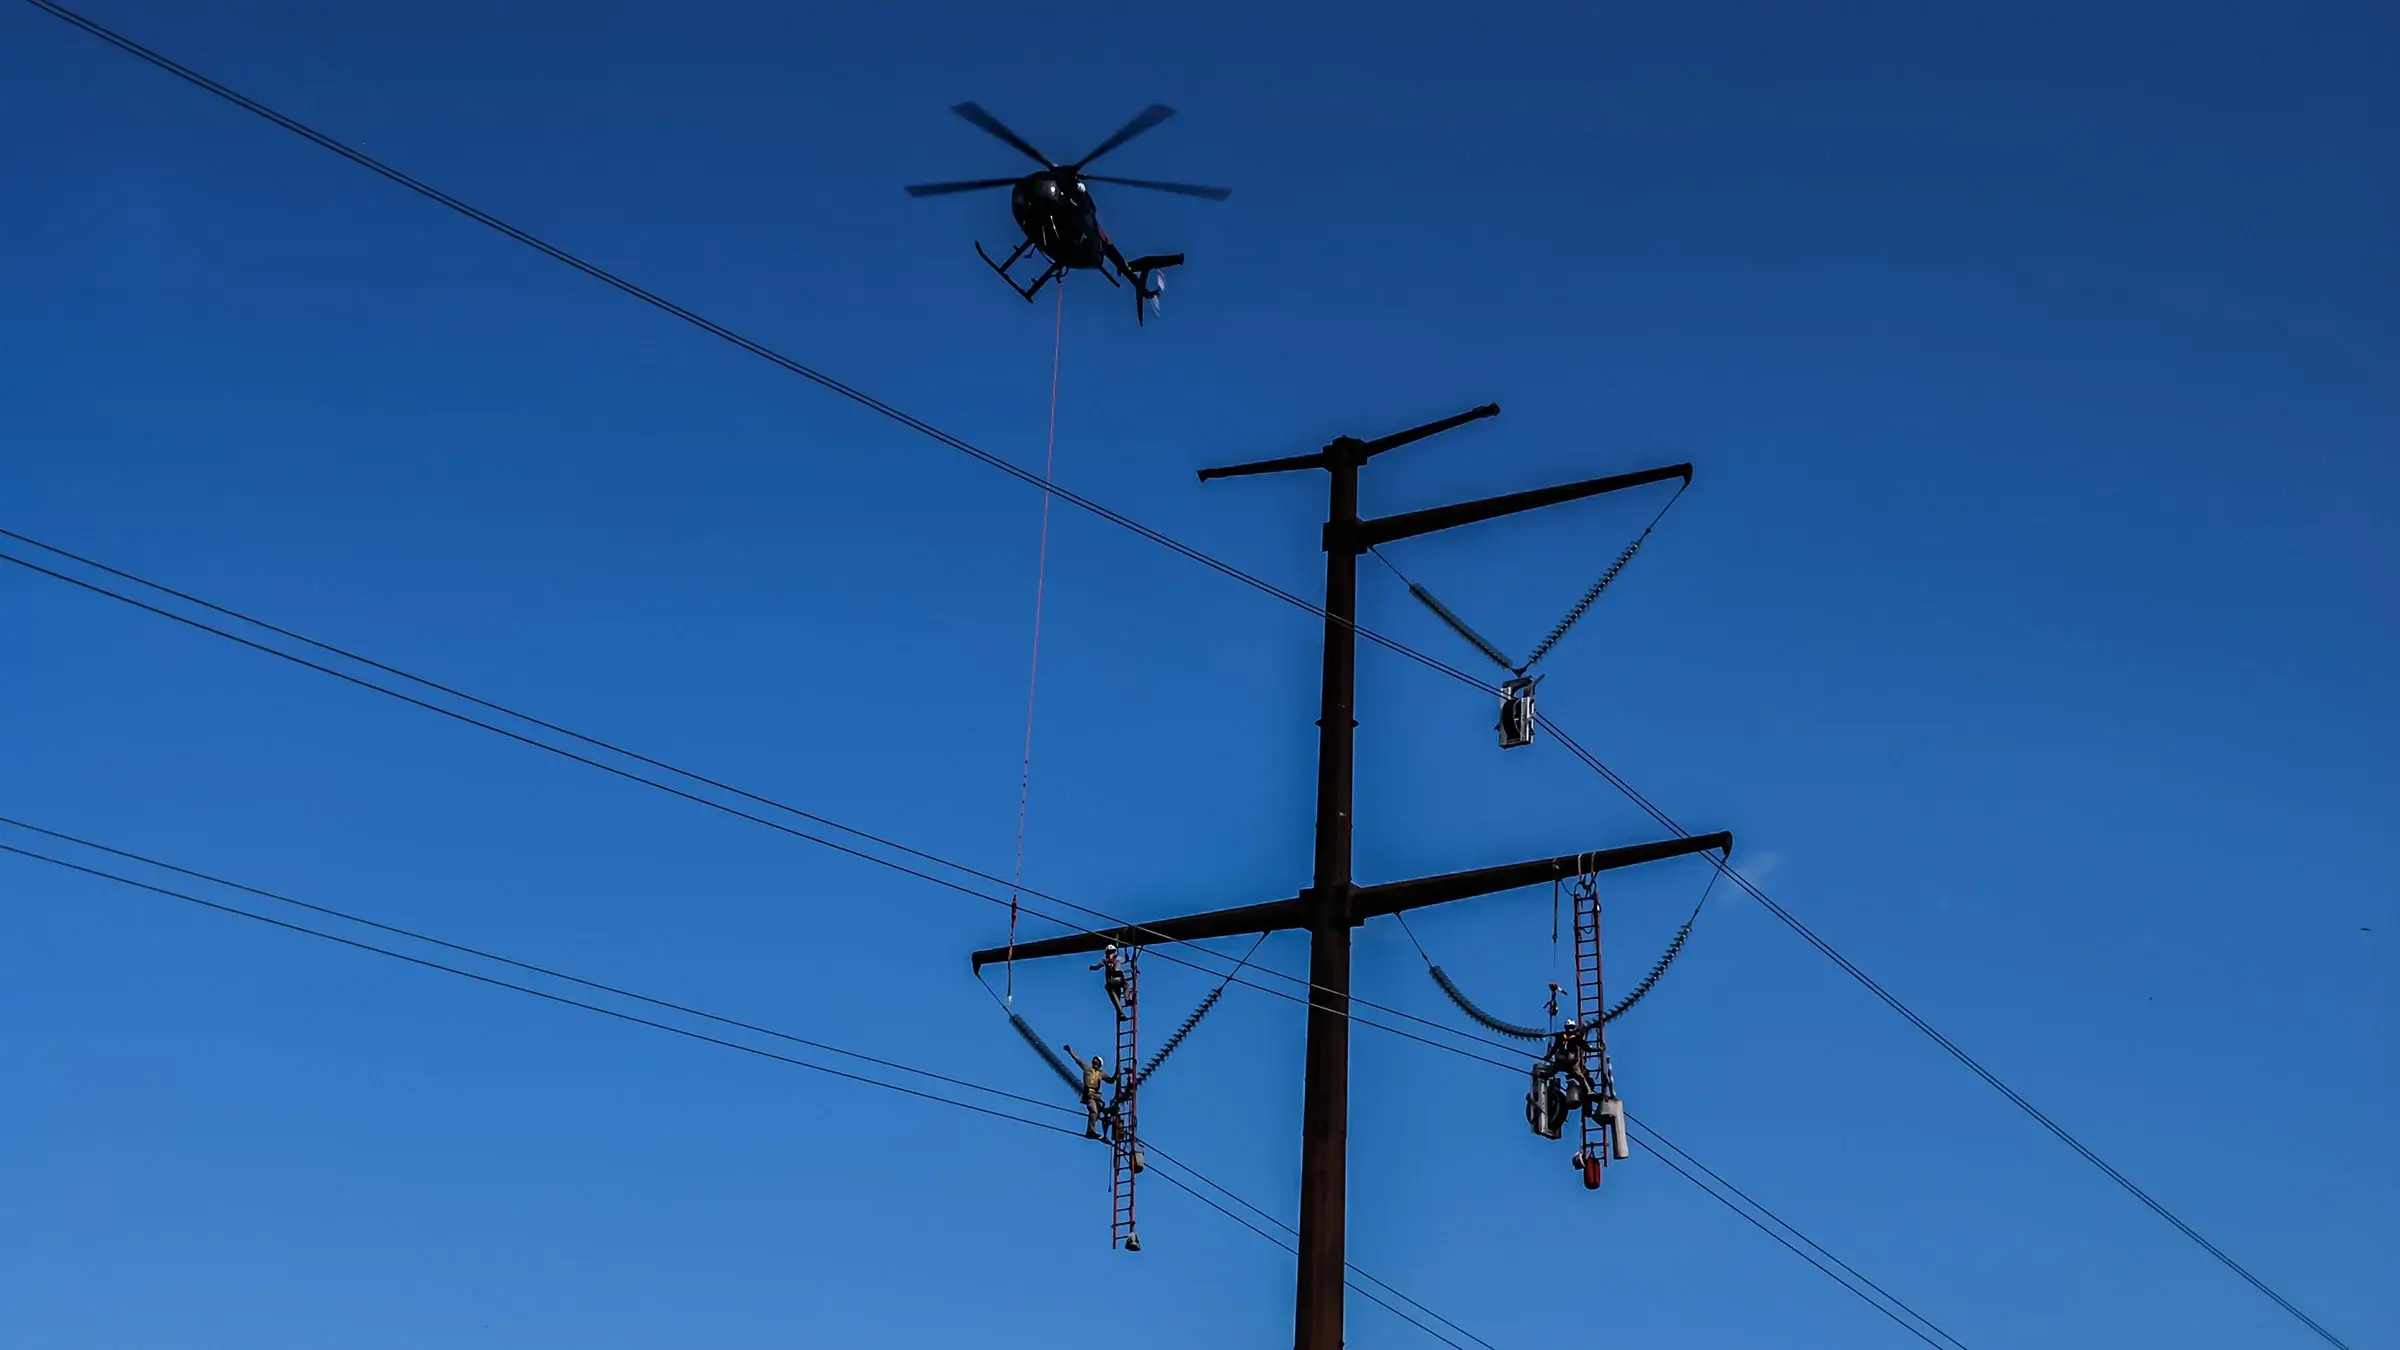 Helicopter flies over crew on power poles to provide them with more equipment